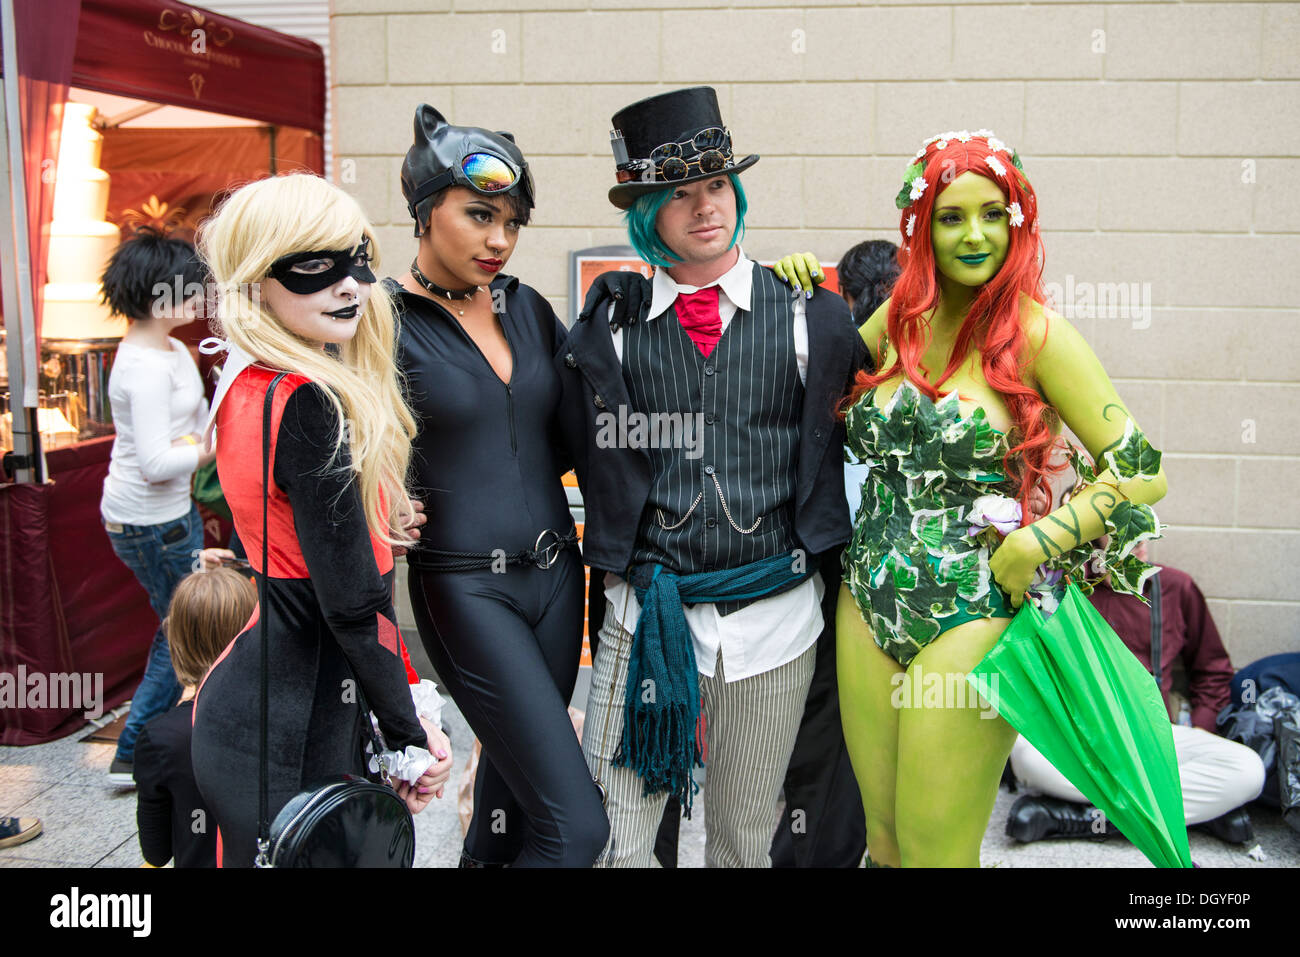 LONDON, UK - OCTOBER 26: Cosplayers dressed as a Harley Quinn, Catwoman and Poison Ivy from Batman for the Comicon Stock Photo